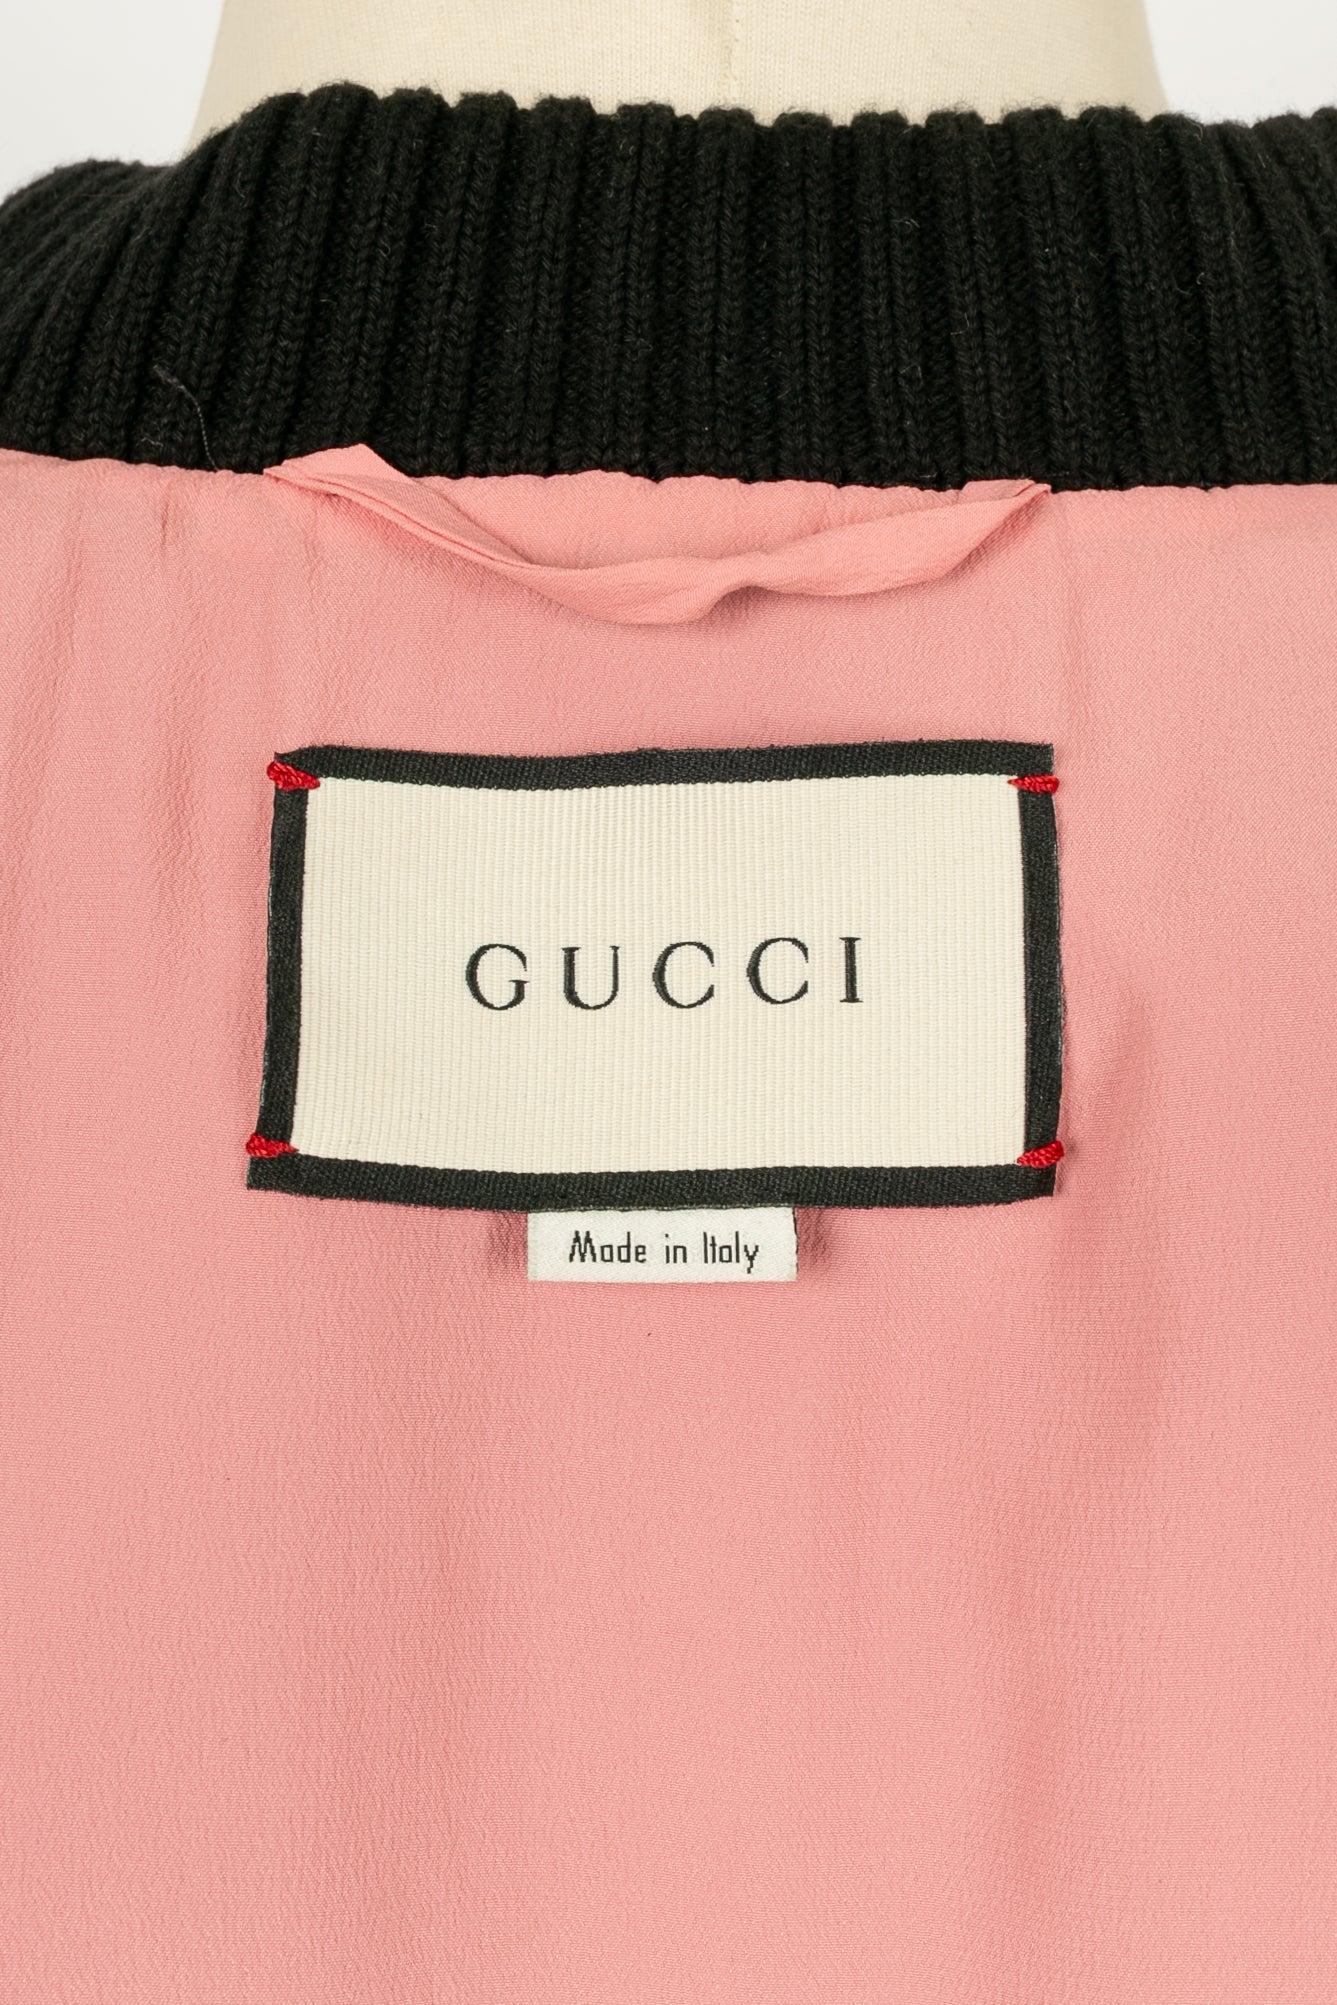 Gucci Embroidered Jacket in Silk And Cotton For Sale 2